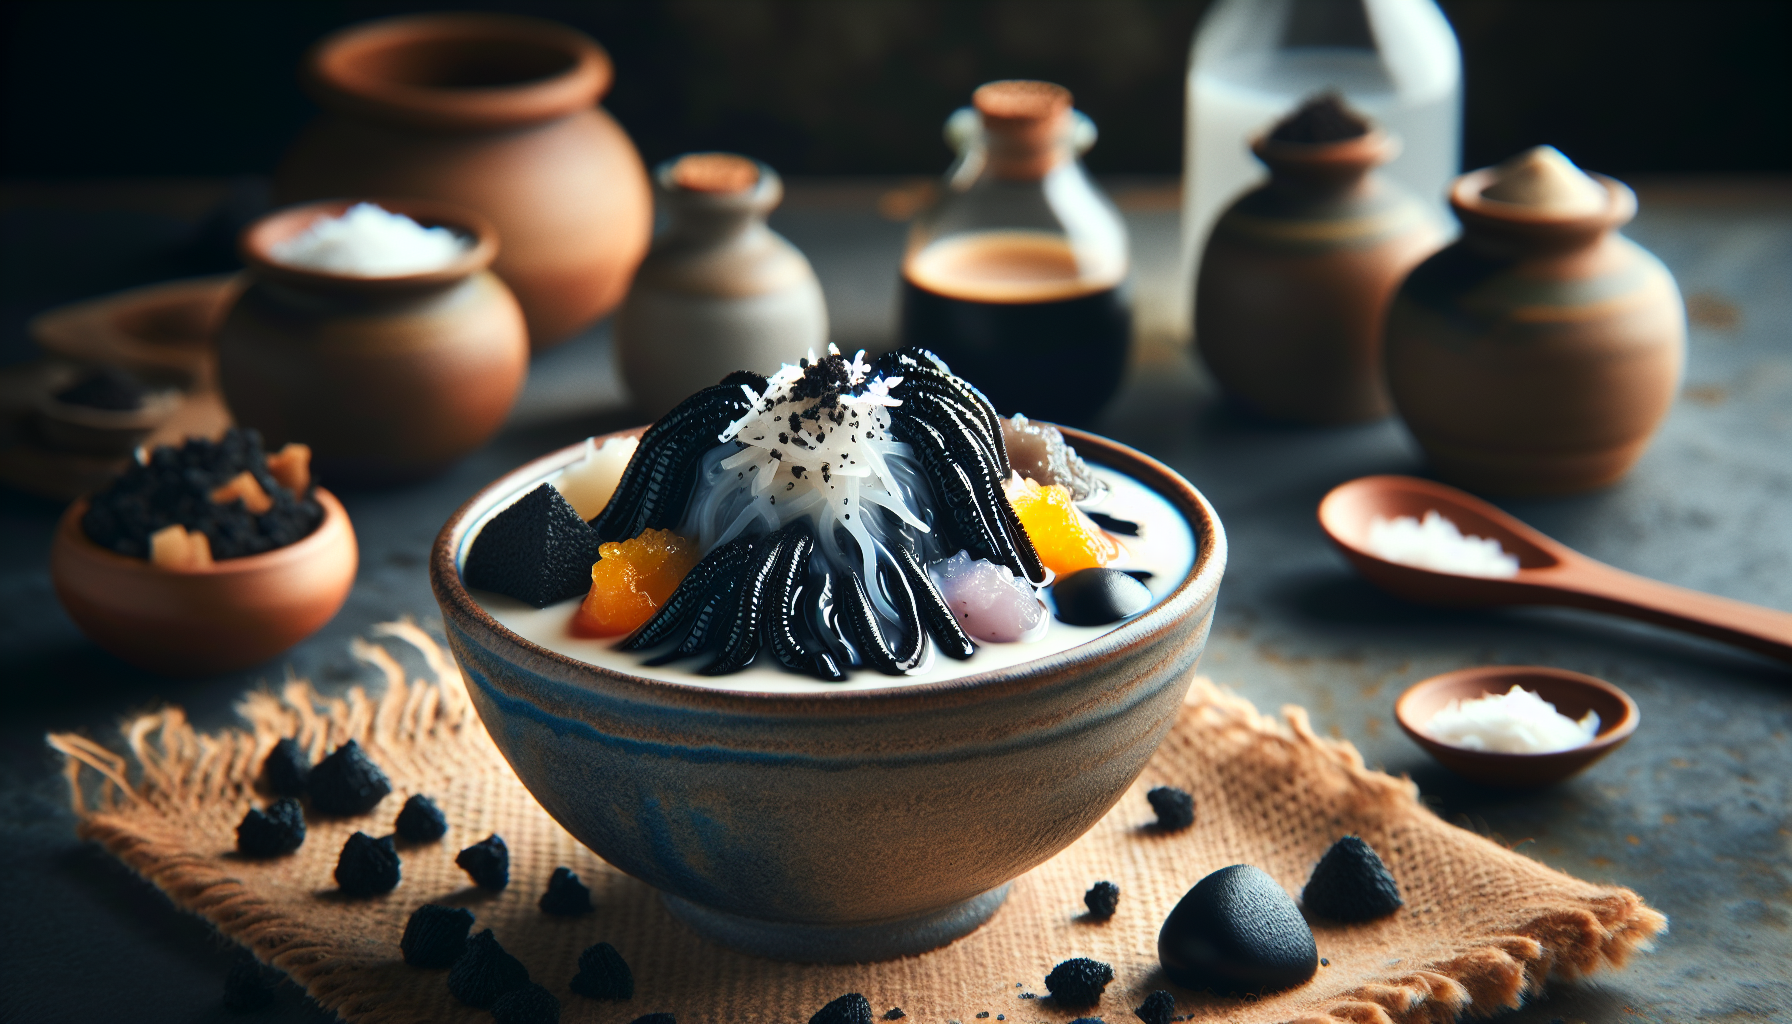 How Do You Prepare Keo Meuk, The Cambodian Dessert Made With Coconut Milk And Squid Ink?